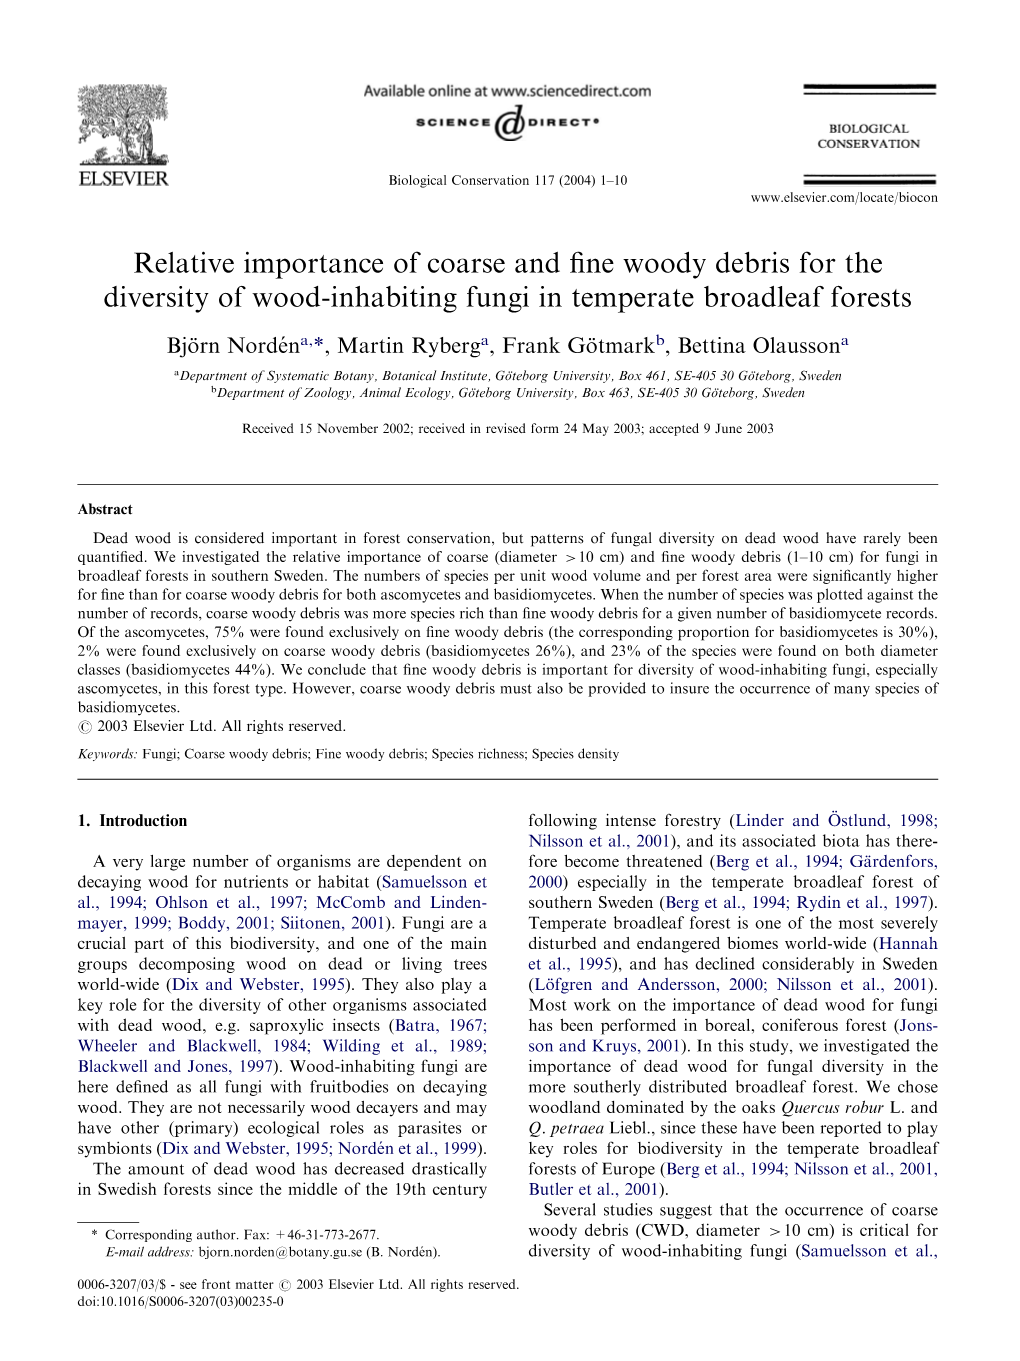 Relative Importance of Coarse and Fine Woody Debris for the Diversity Of